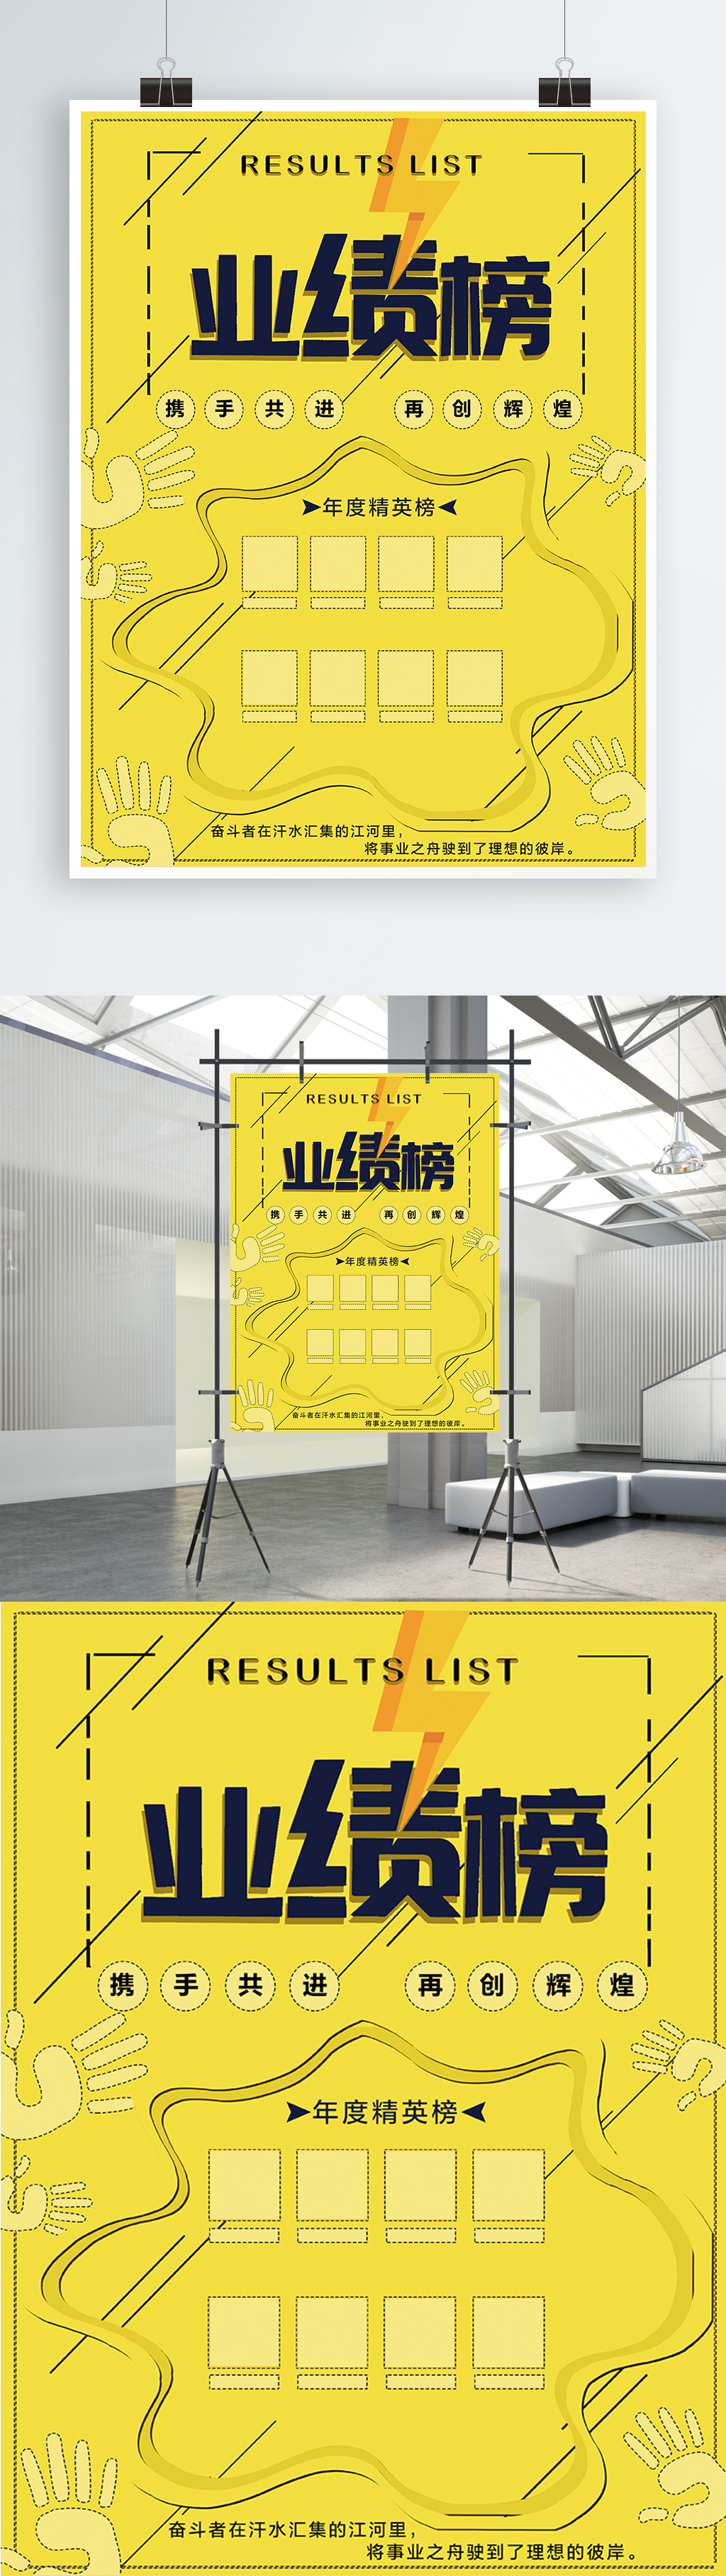 Download Yellow Minimalistic Creative Poster Background Template Image Picture Free Download 401441374 Lovepik Com PSD Mockup Templates